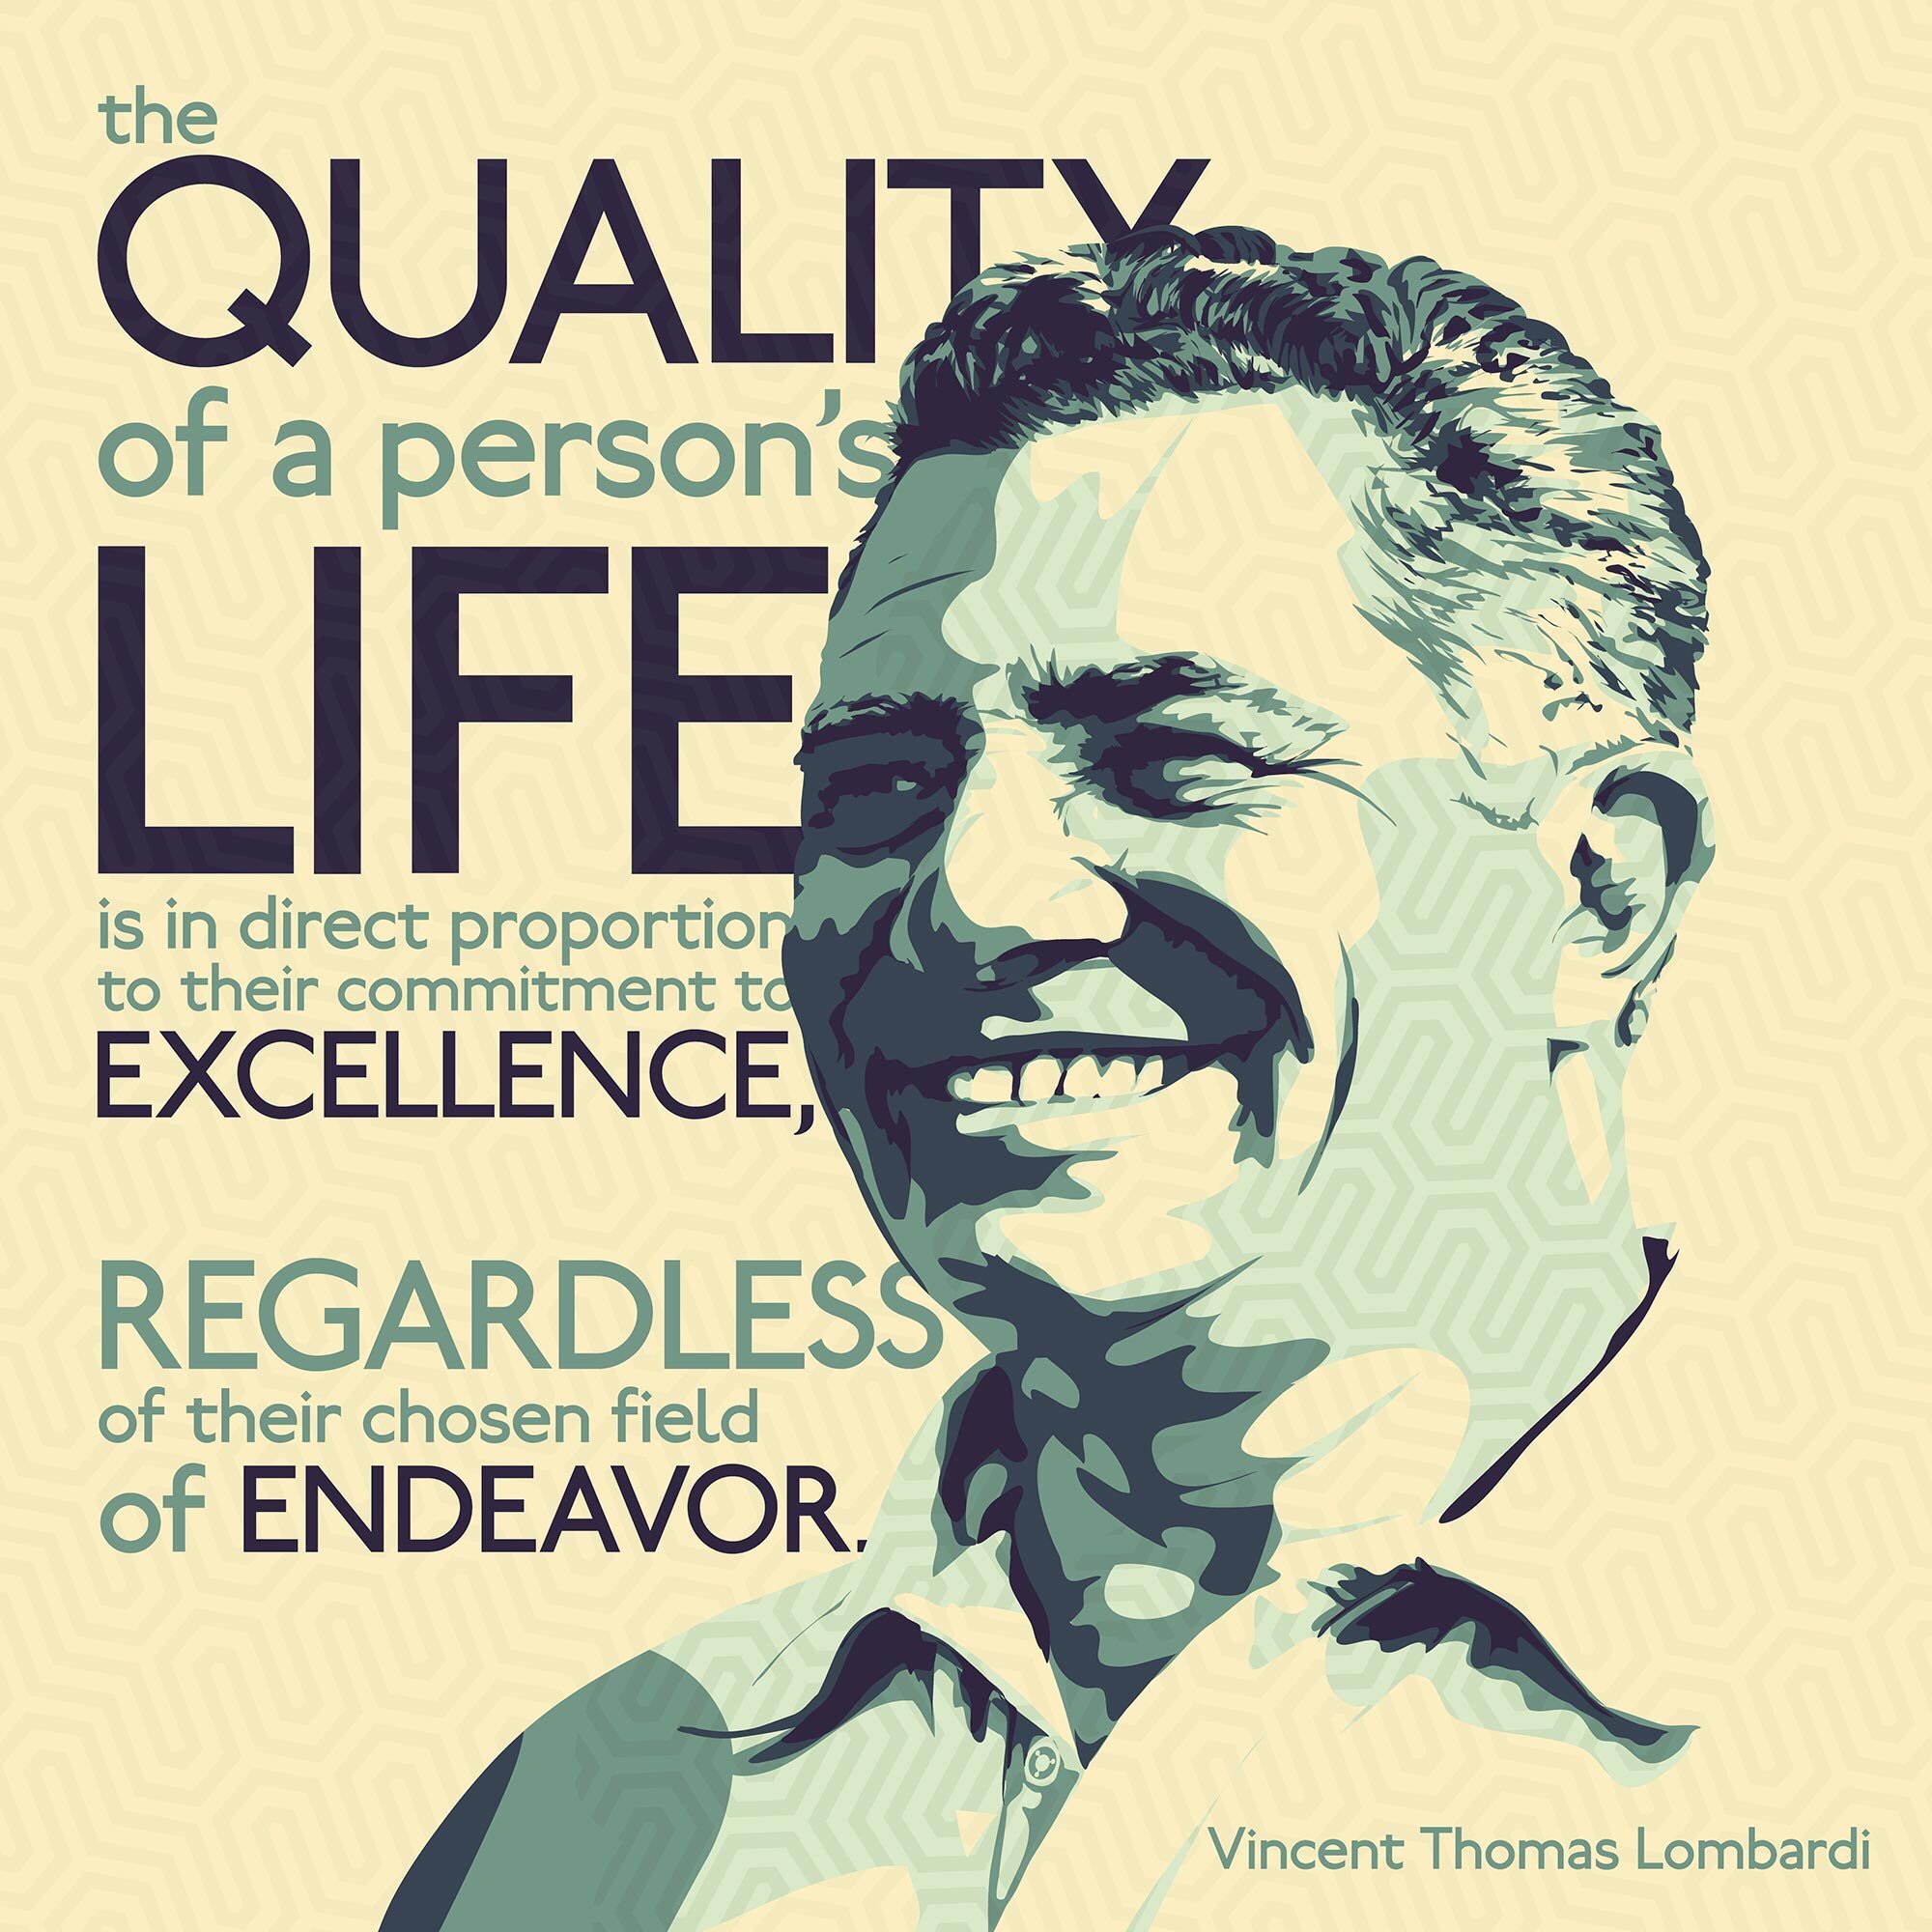 poster - the of a person's Quality Life 6 is in direct proportion to their commitment to Excellence Regardless of Endeavor of their chosen field Vincent Thomas Lombardi